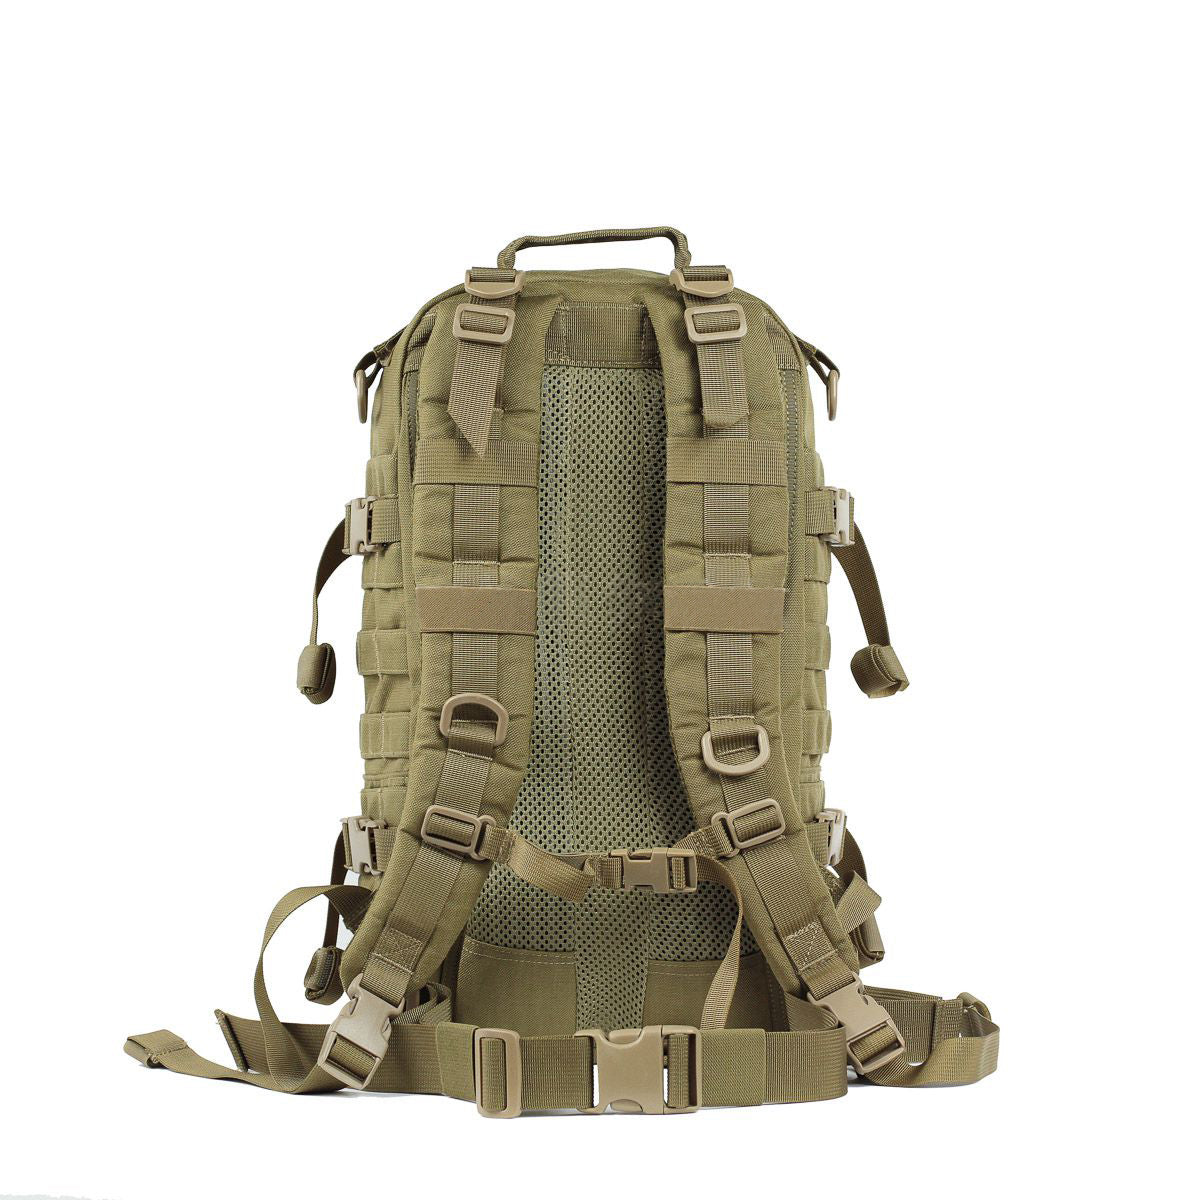 25L Tactical Backpack, also suitable for outdoor sports